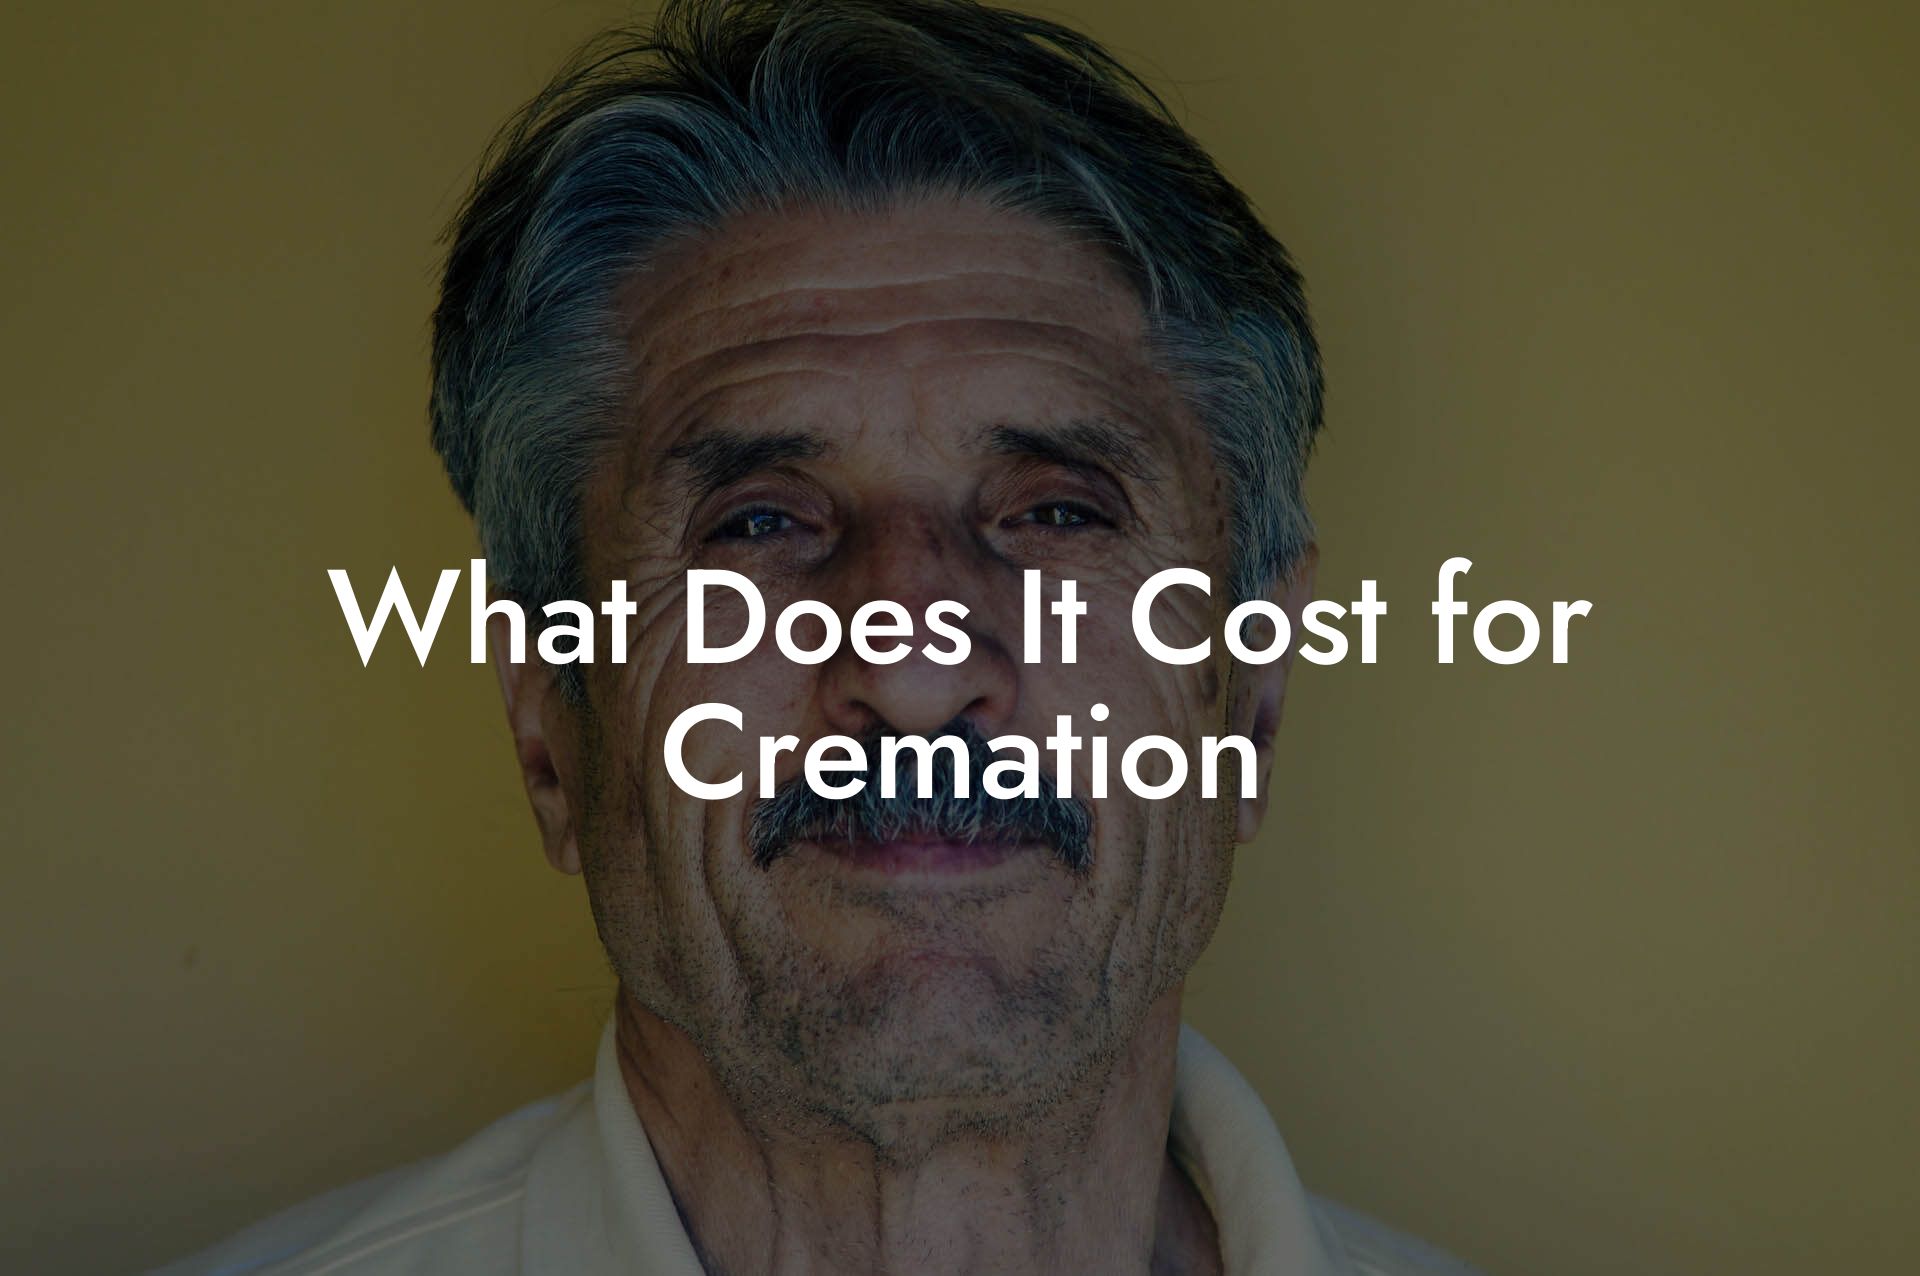 What Does It Cost for Cremation